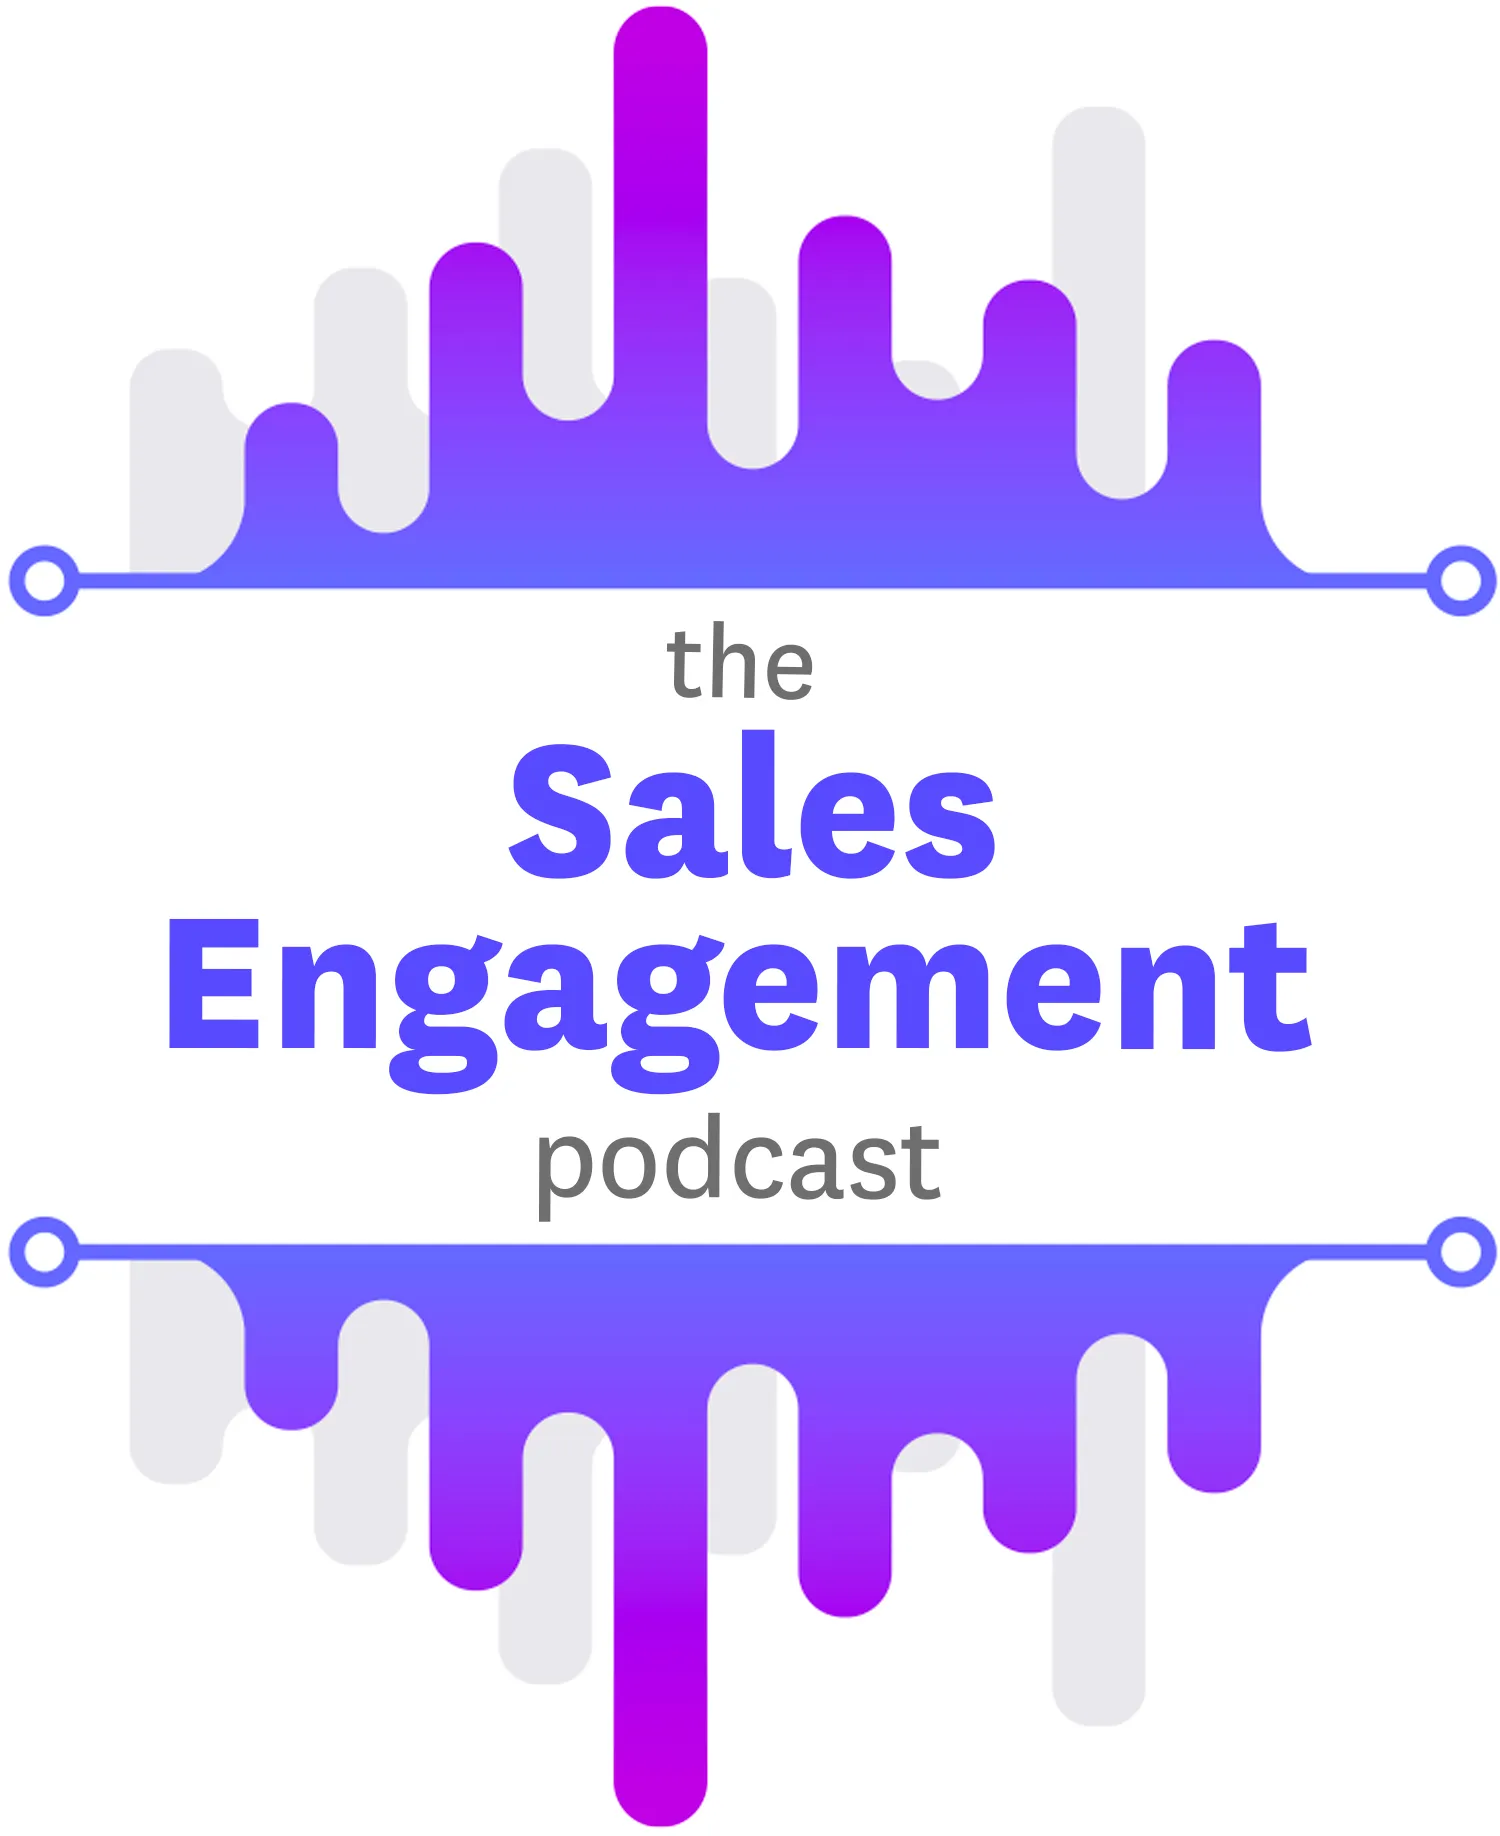 The Sales Engagement Podcast